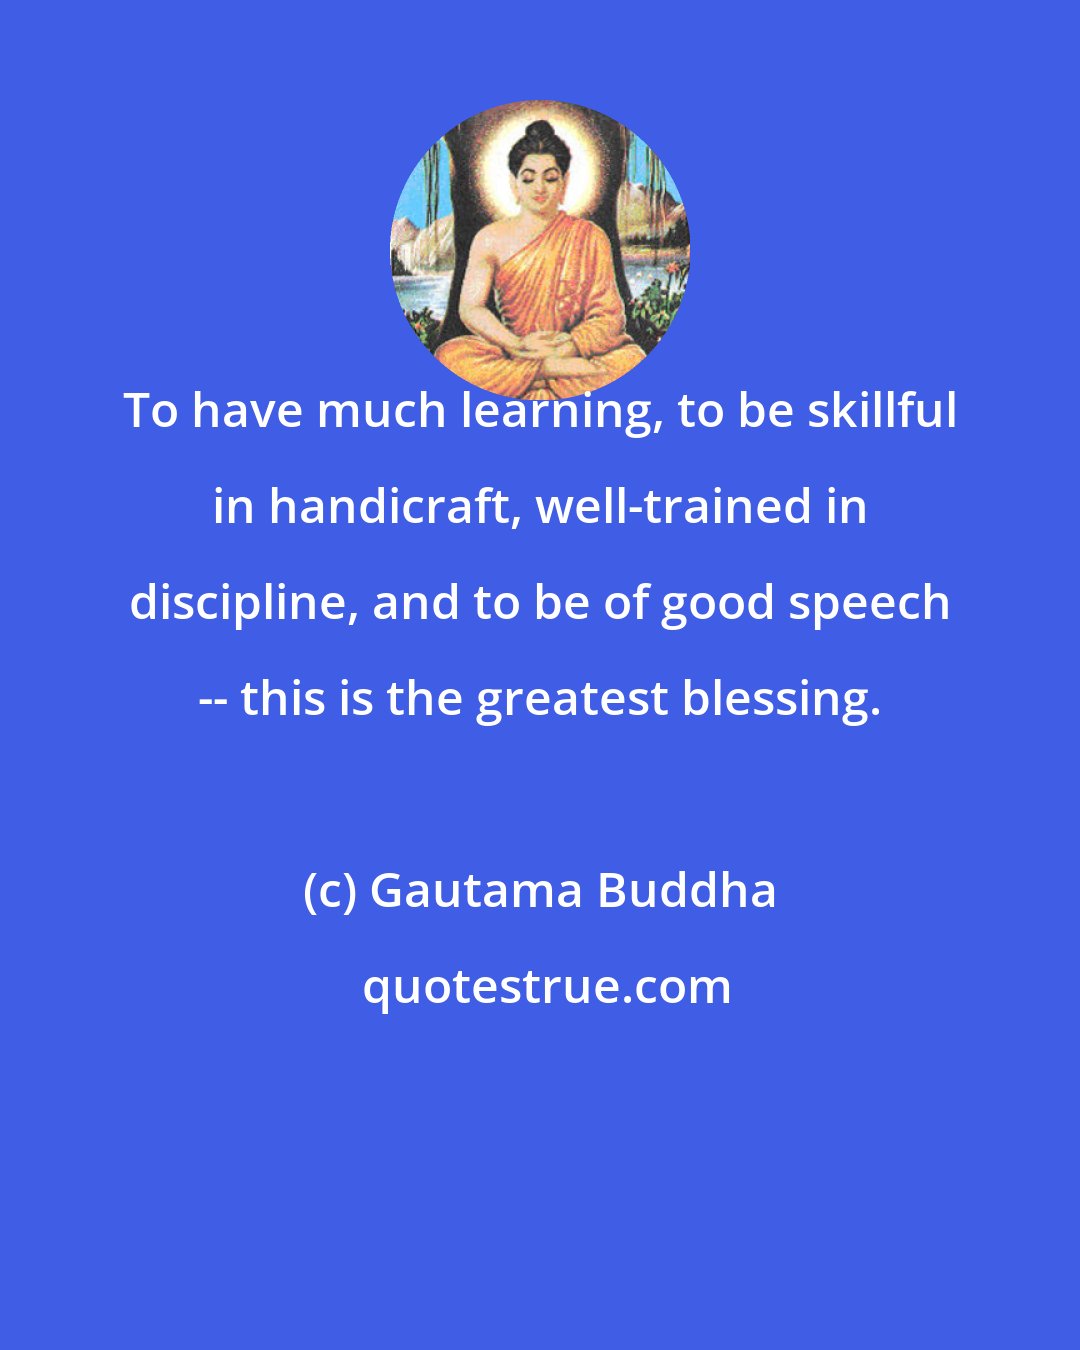 Gautama Buddha: To have much learning, to be skillful in handicraft, well-trained in discipline, and to be of good speech -- this is the greatest blessing.